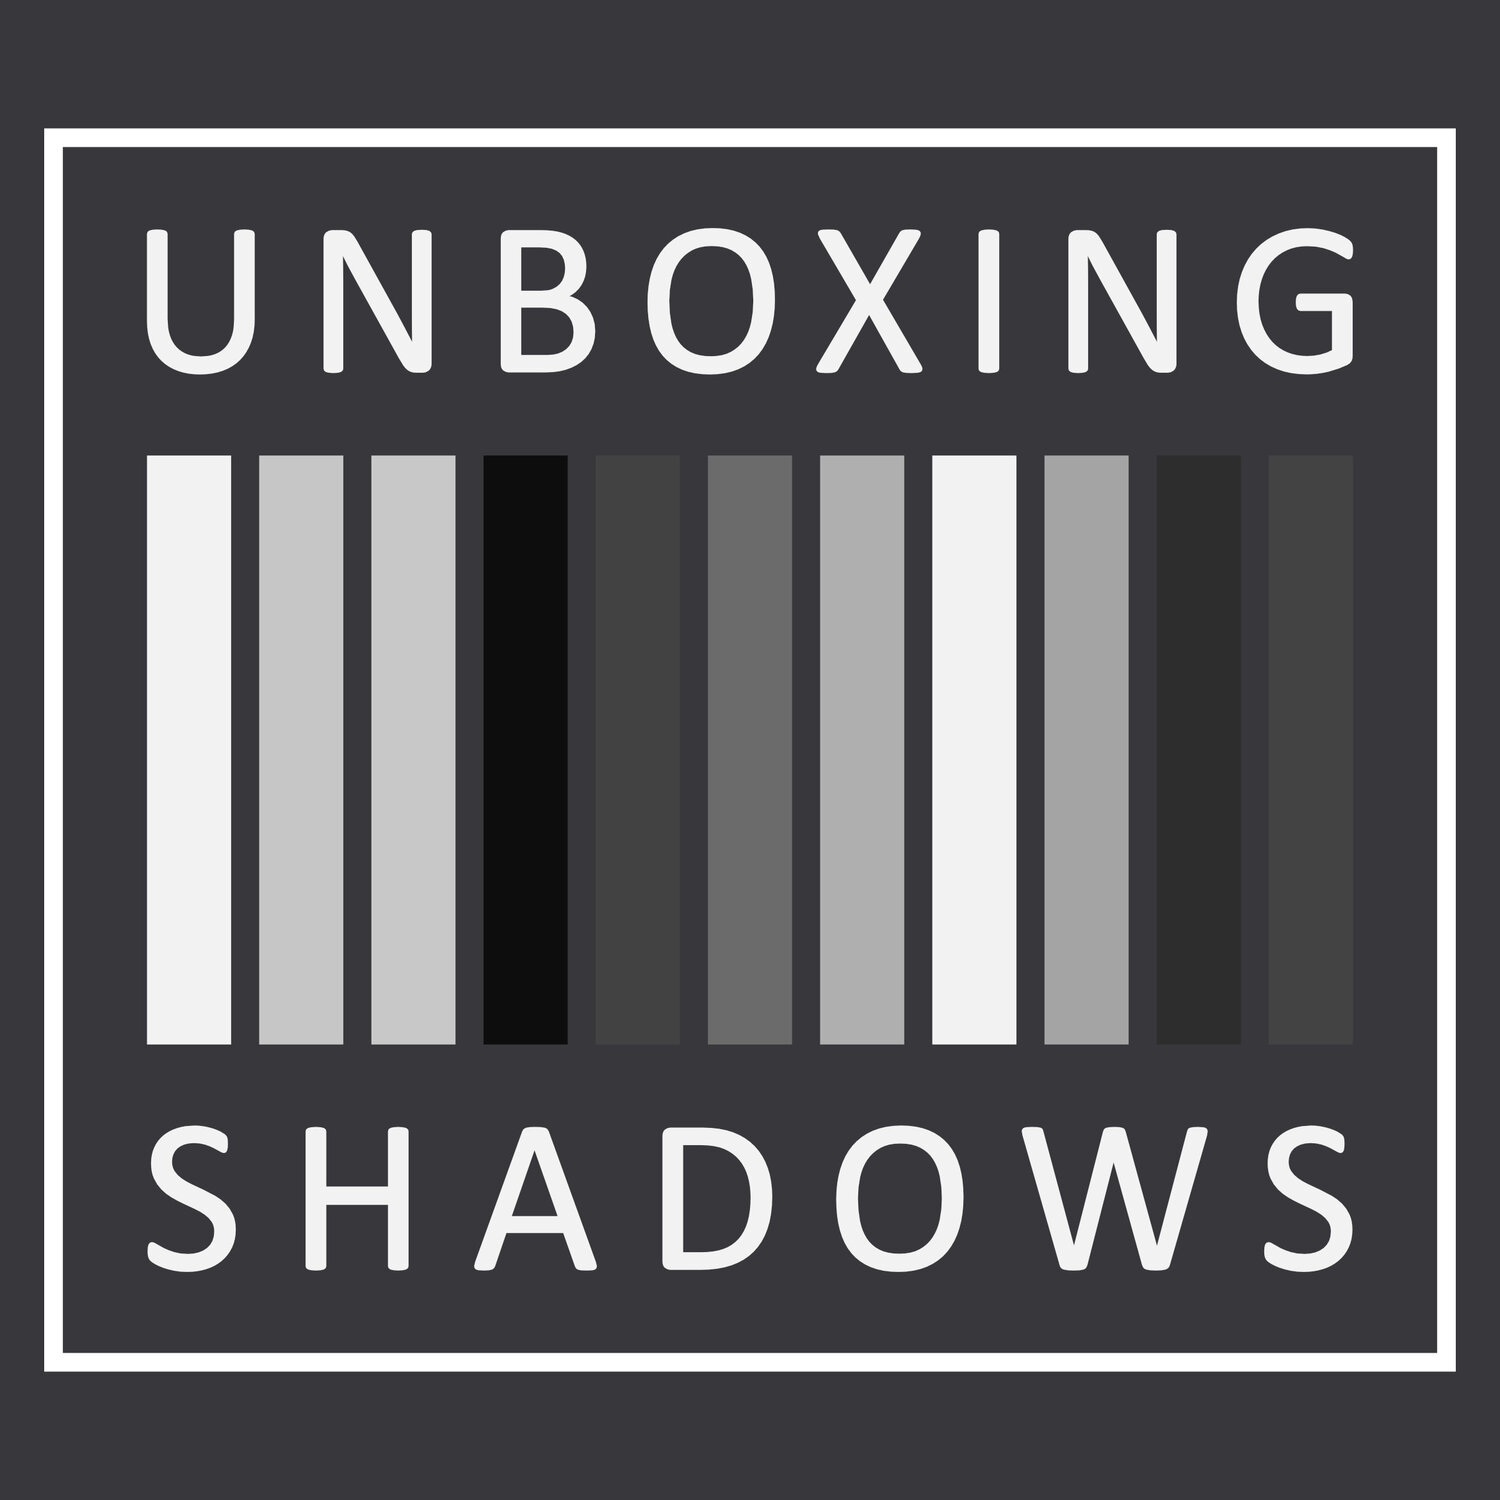 UNBOXING SHADOWS